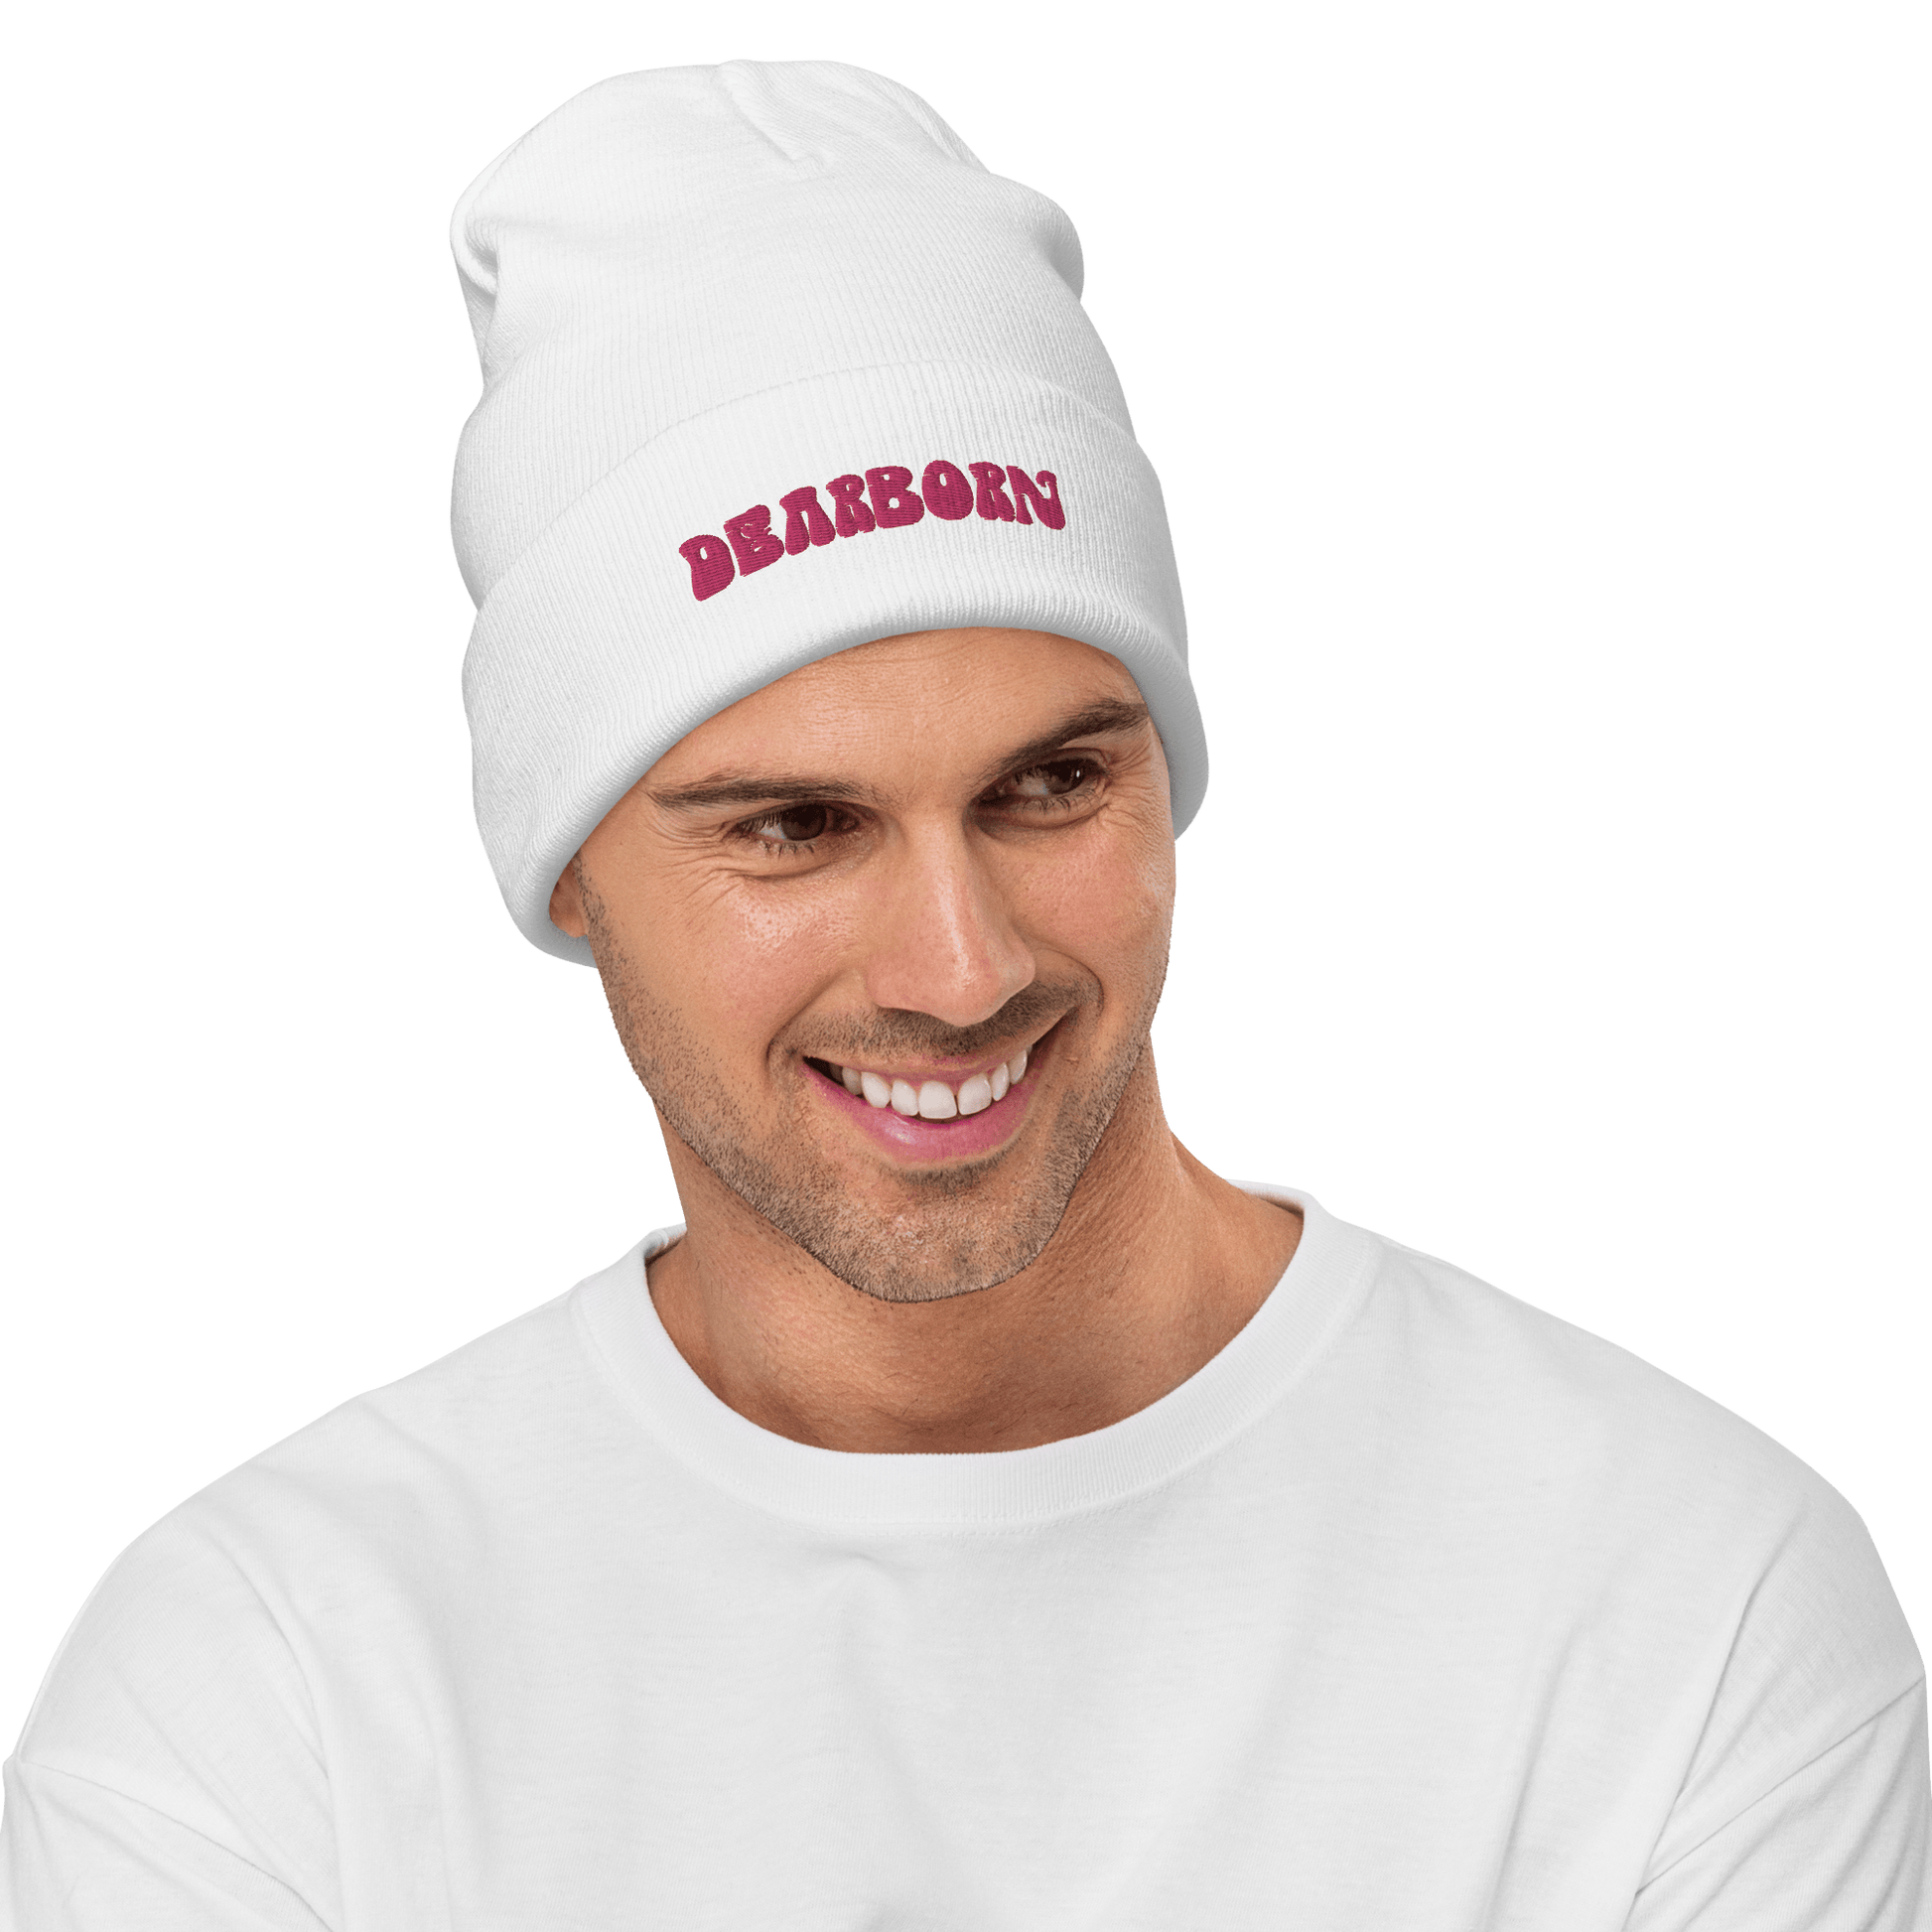 'Dearborn' Winter Beanie (1960's Font) | Pink Embroidery - Circumspice Michigan